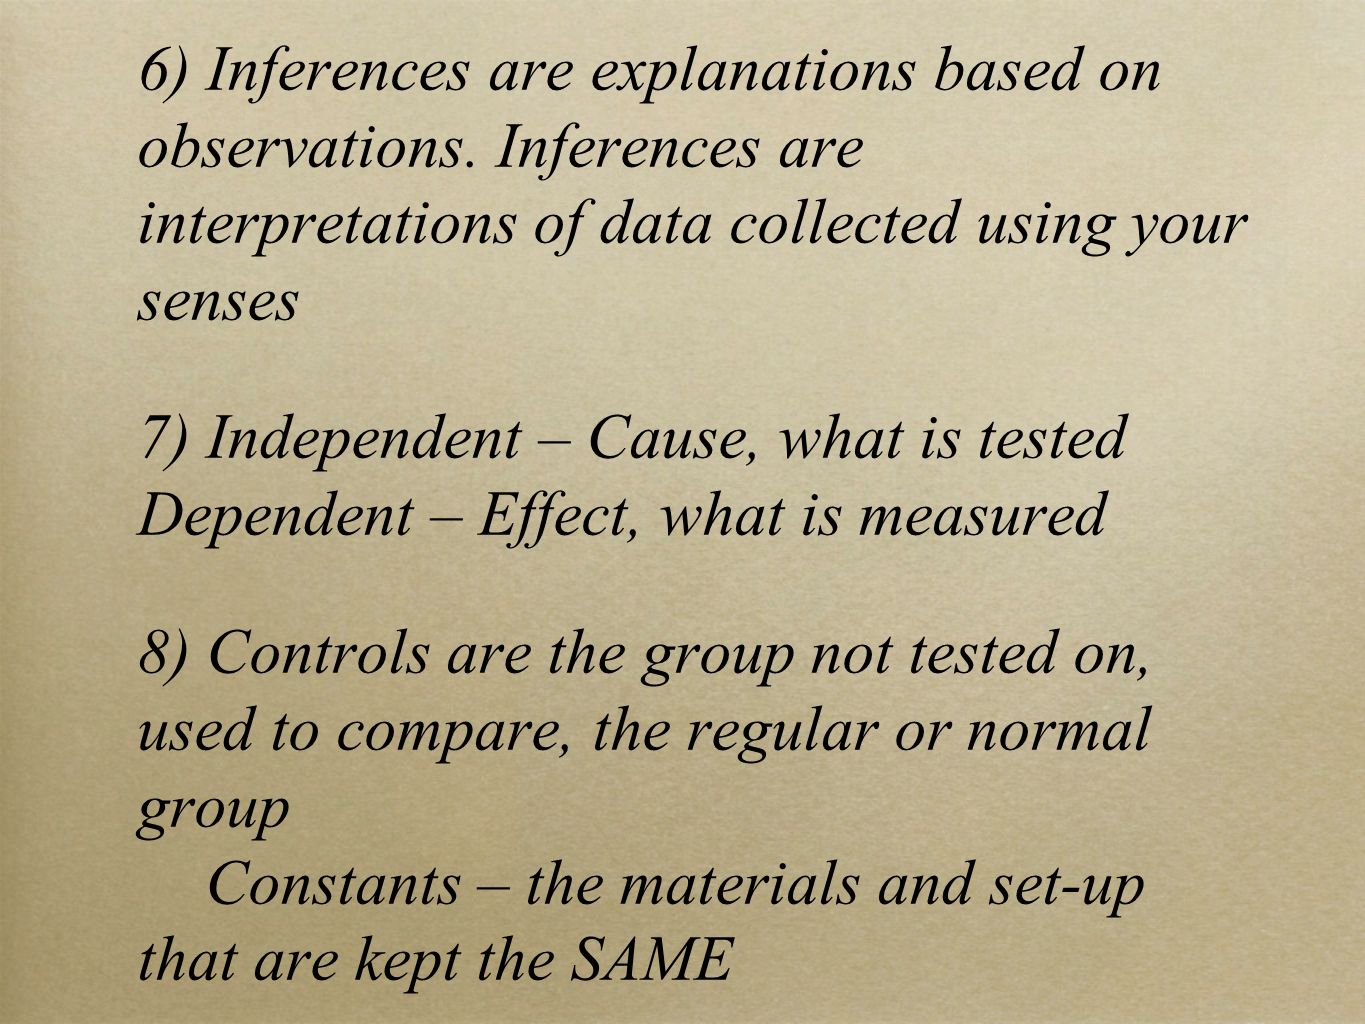 6) Inferences are explanations based on observations